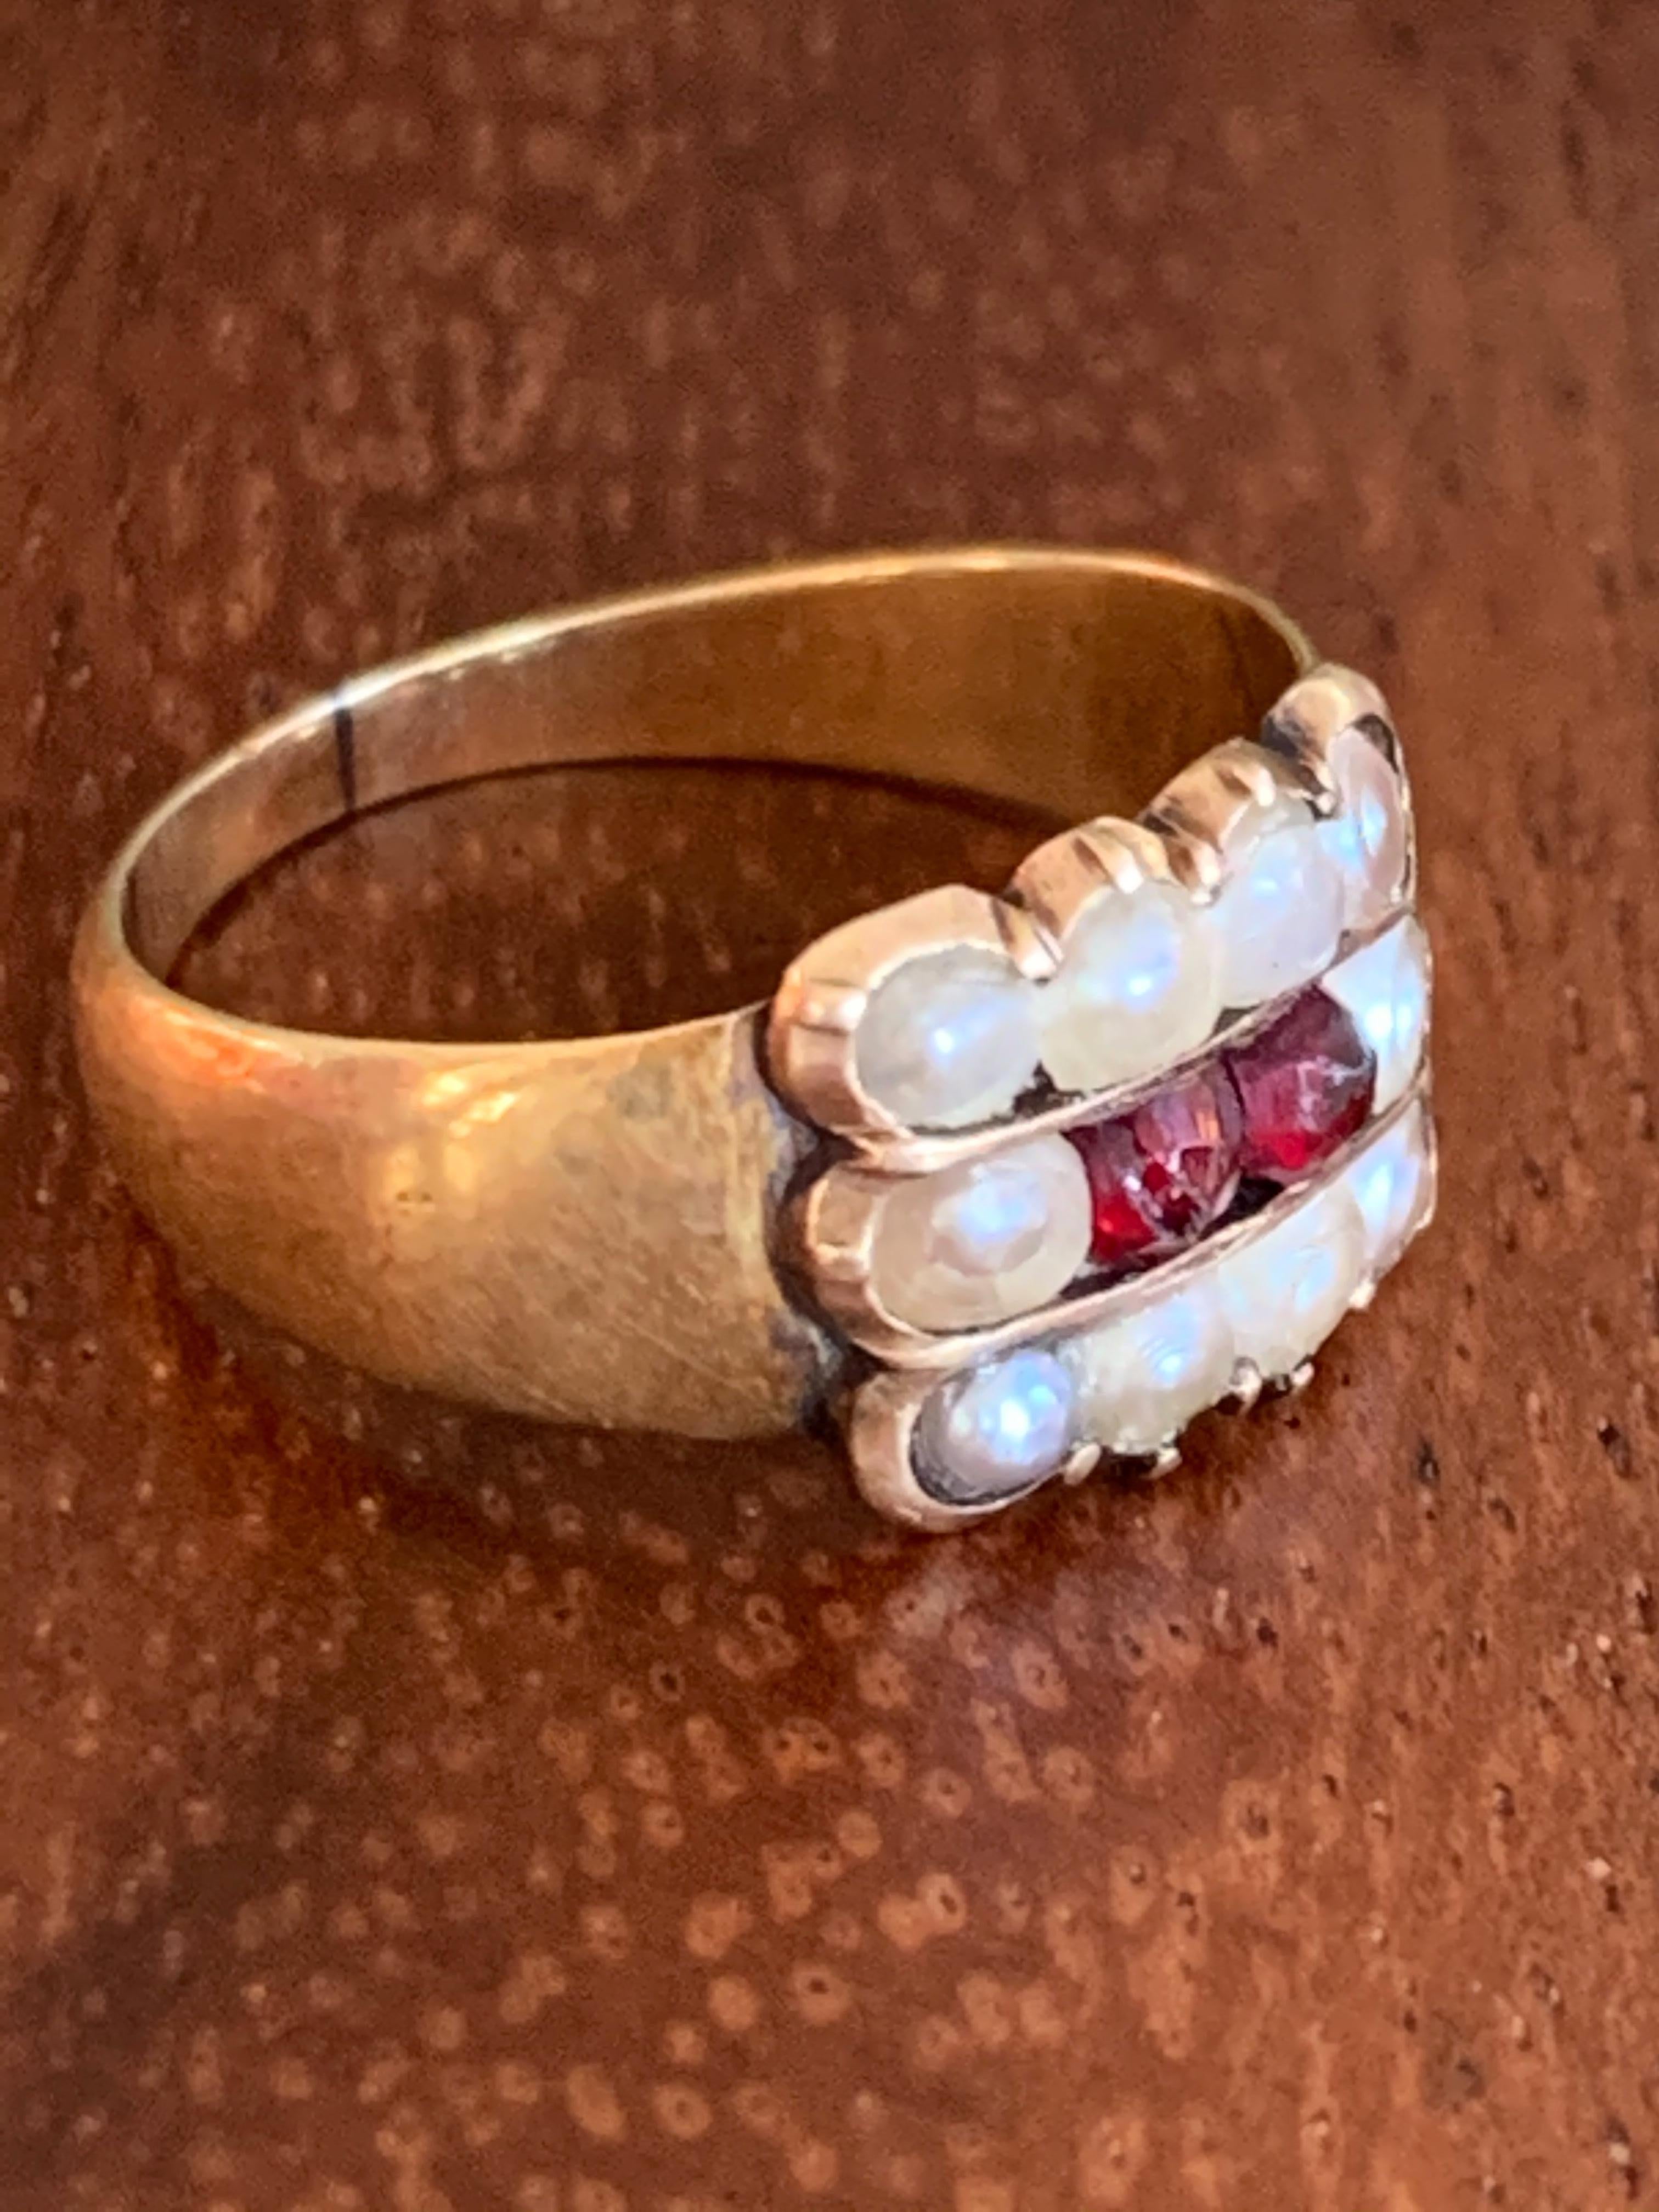 This Georgian ring is so elegant in its simplicity.  It features ten Pearls which stand guard over two faceted Garnet stones in a 14 karat yellow Gold setting. 

Size: 5 1/2 - this ring is resizable but vendor does not offer sizing services.